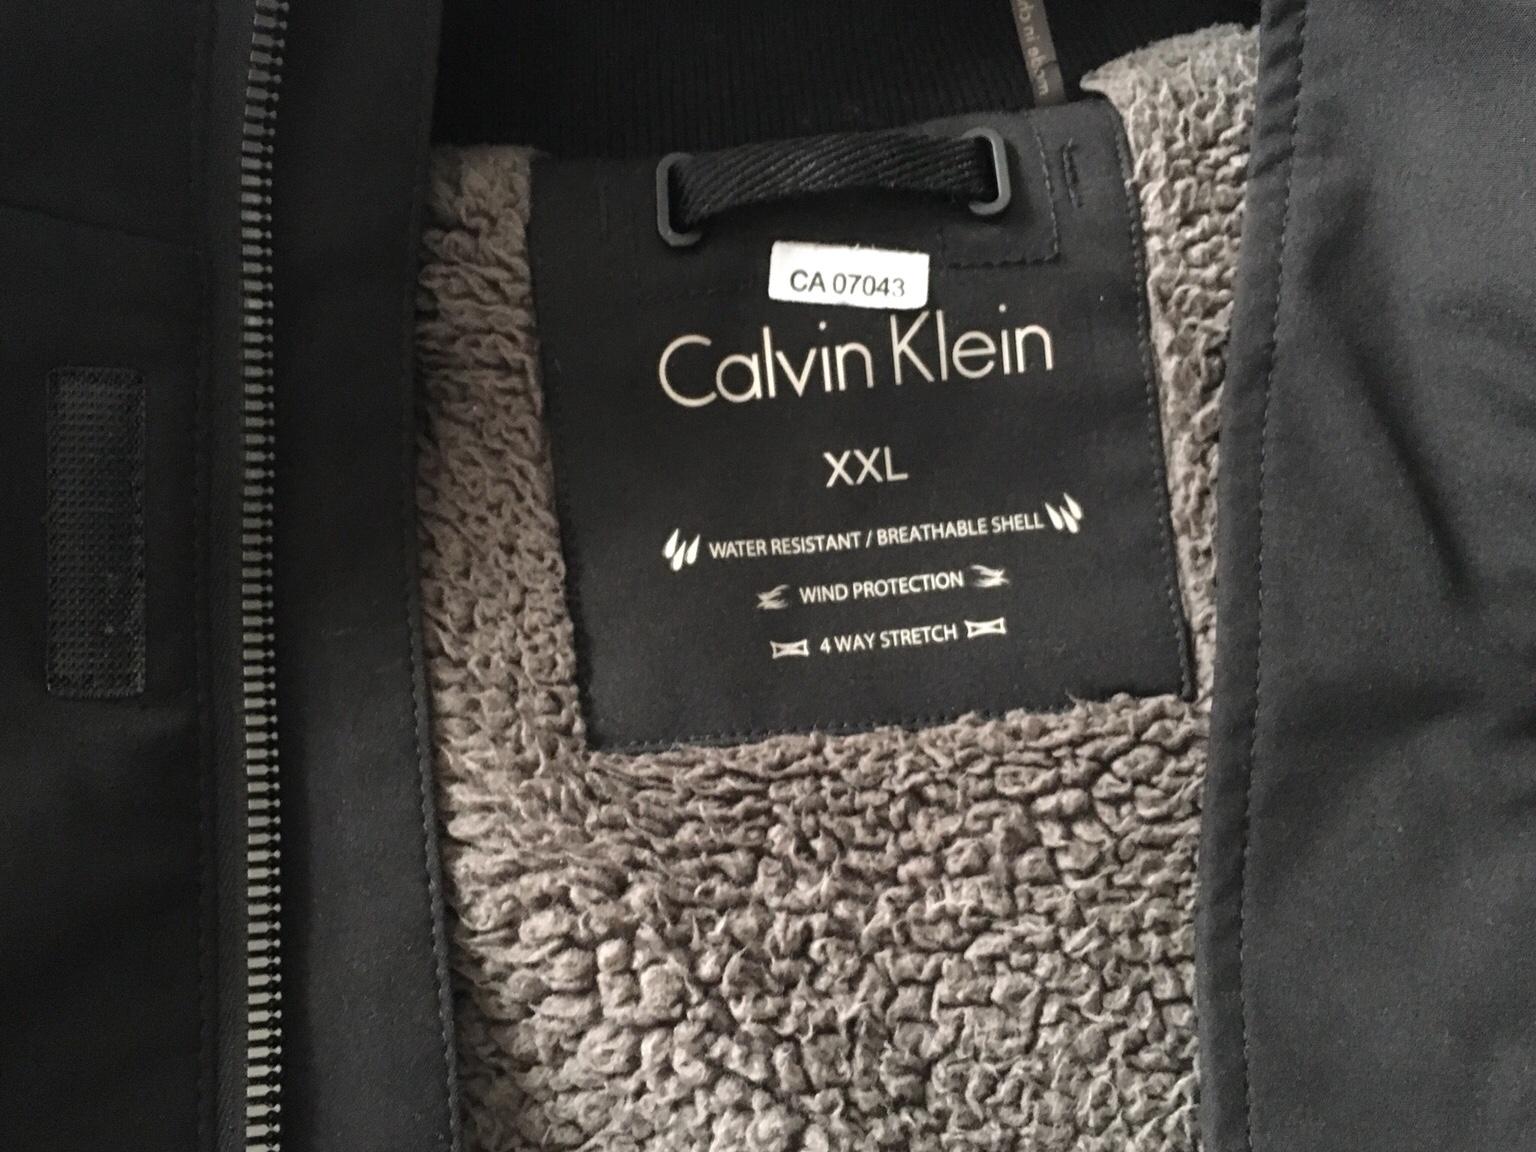 calvin klein water resistant breathable shell wind protection